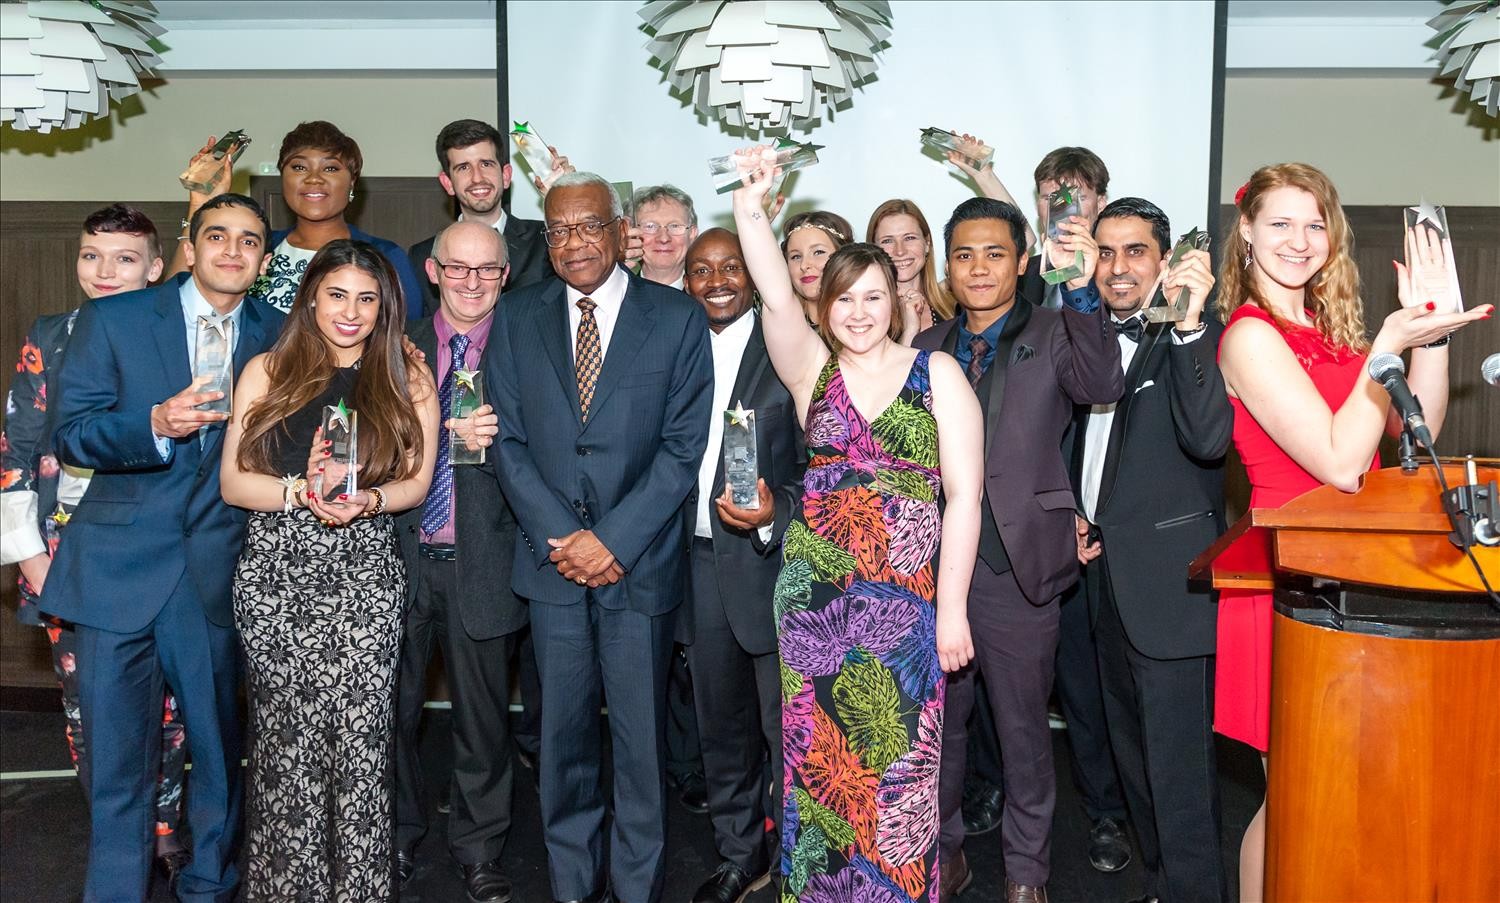 Talent award to recognise student achievement